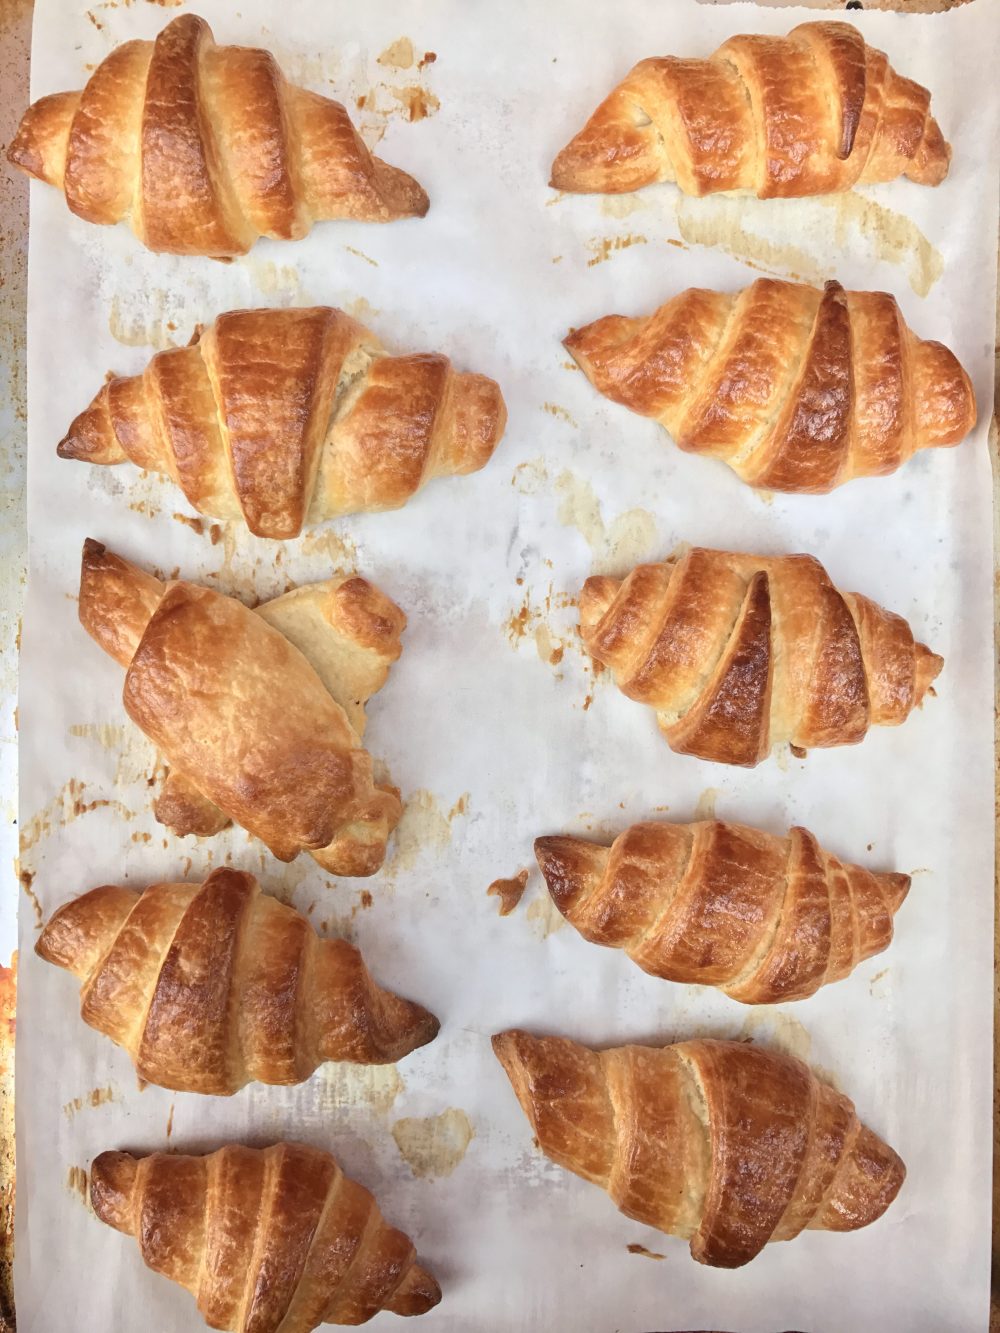 Quick croissants on a tray from In the French kitchen with kids by Mardi MIchels